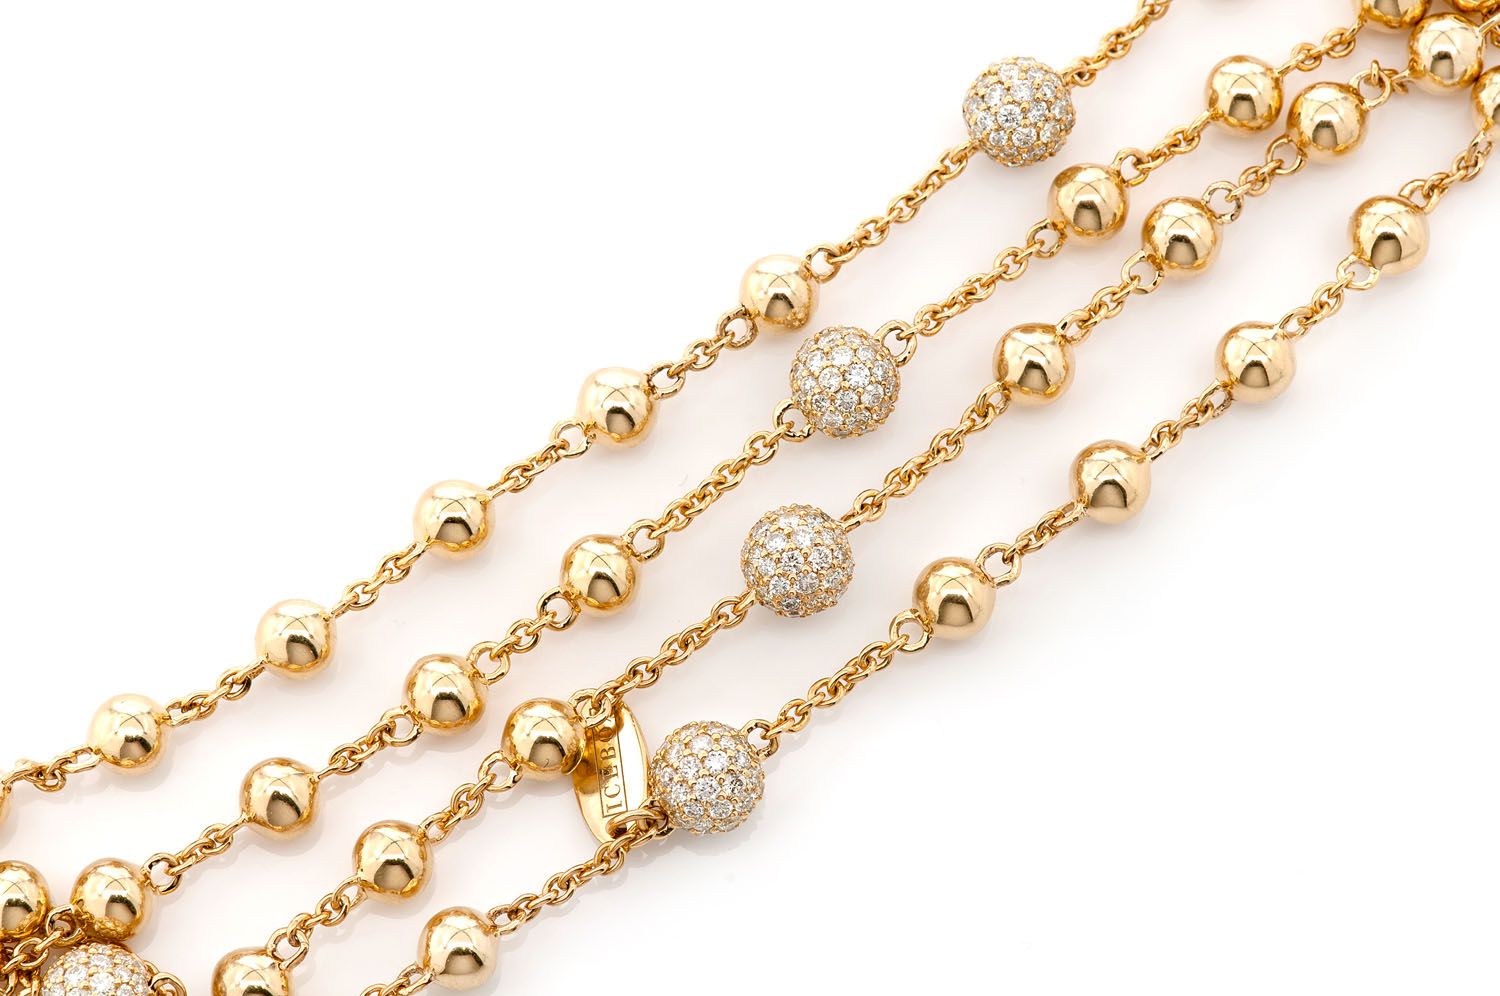 Rosary Bead Necklace 14k   2.87ctw